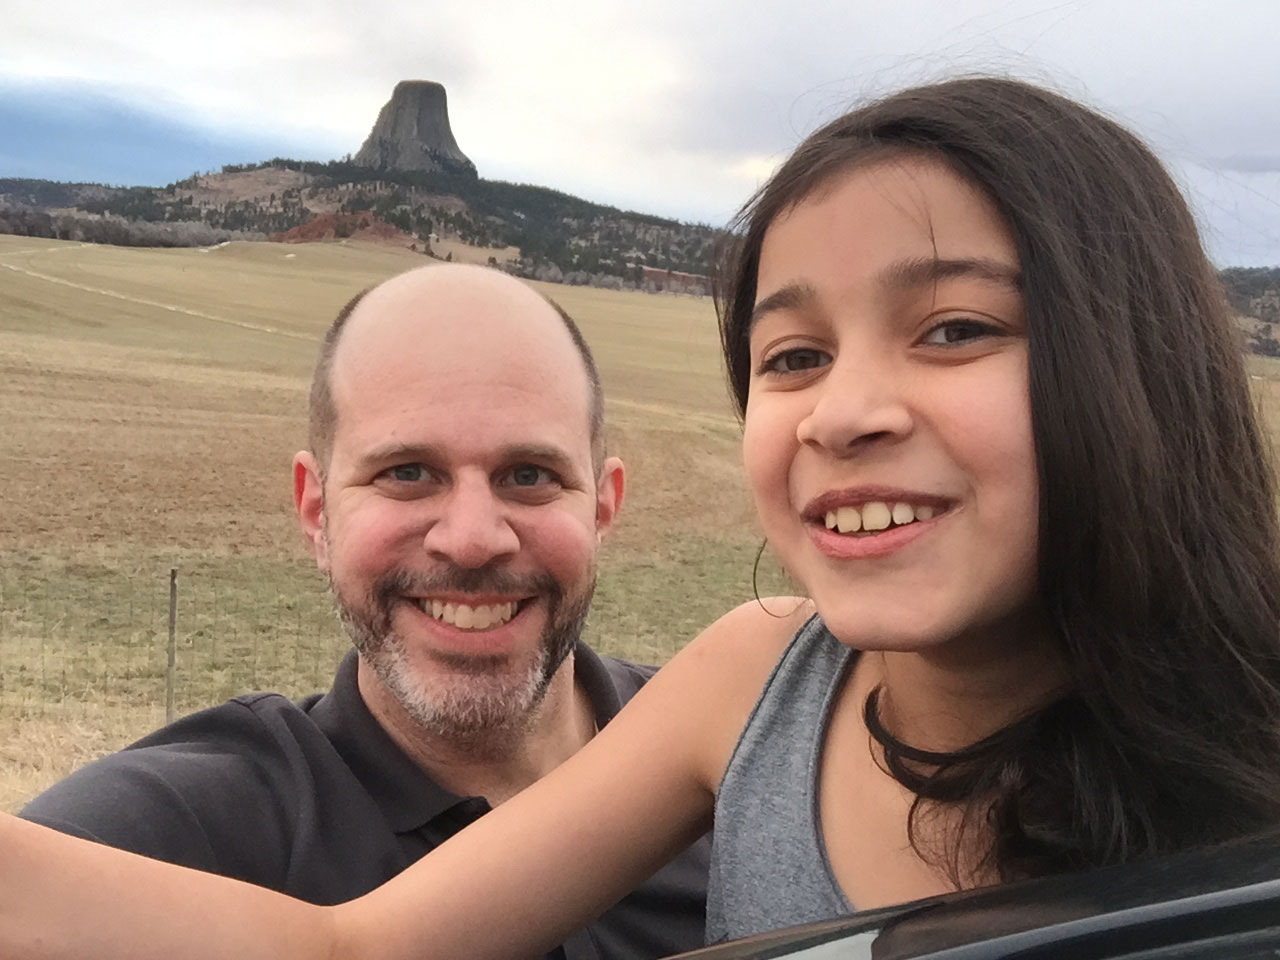 Miles and Serena Fawcett enjoying a father/daughter trip to Idaho. (Courtesy the Fawcett family)